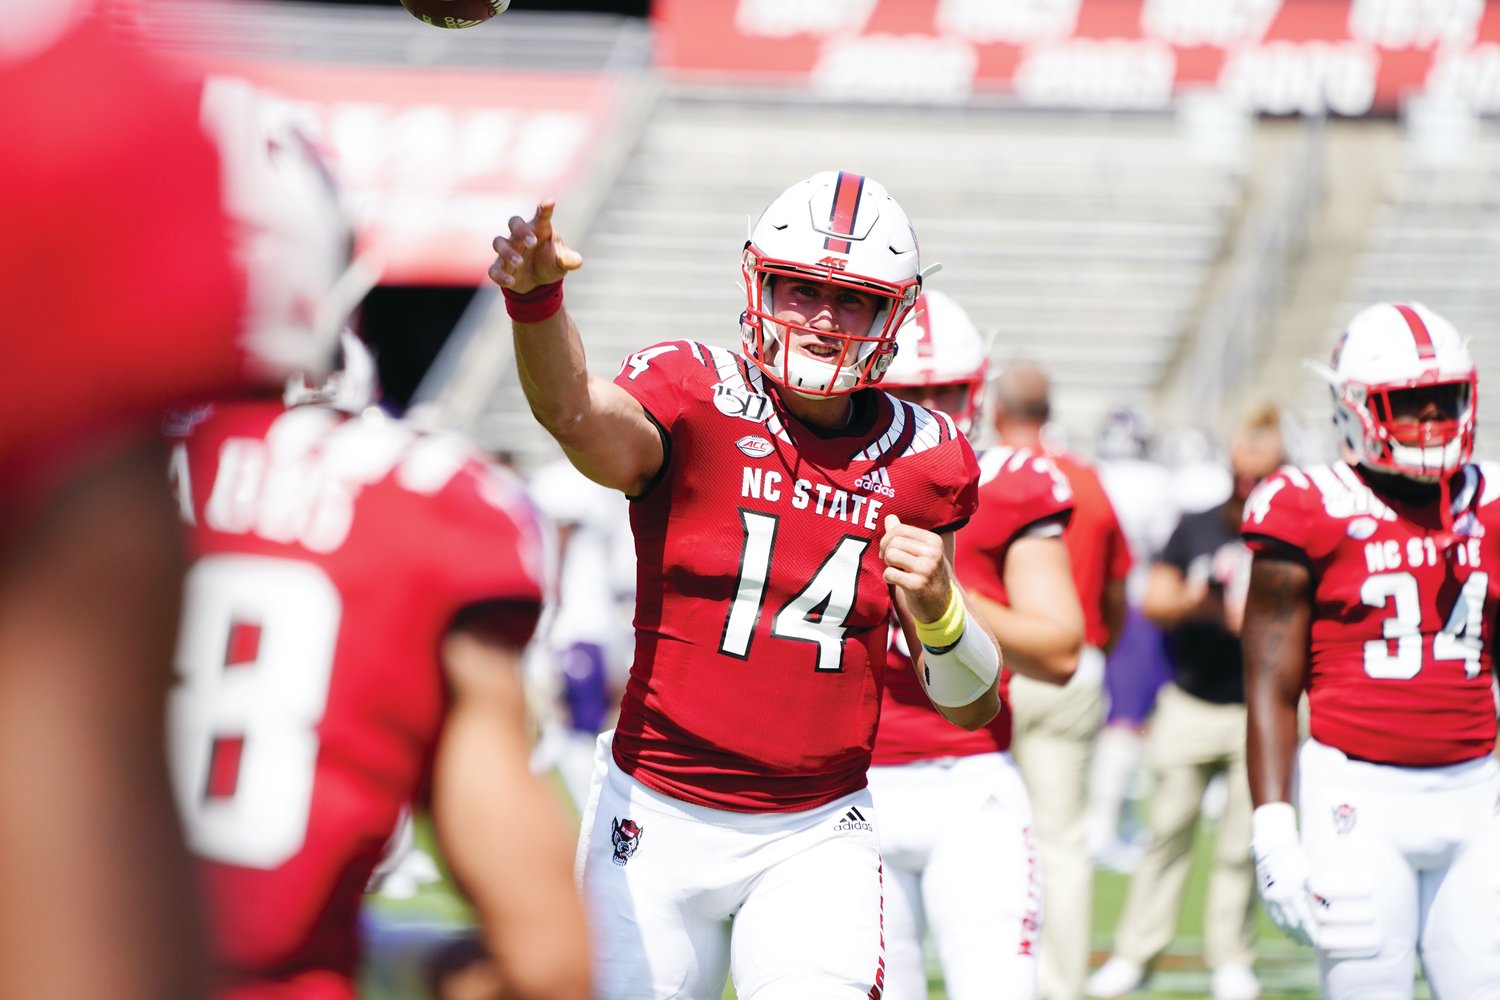 Then-N.C. State quarterback Jamie Shaw (14) warms up ahead of a game against Western Carolina at Carter Finley Stadium on September 7, 2019. Shaw has since switched to middle linebacker.